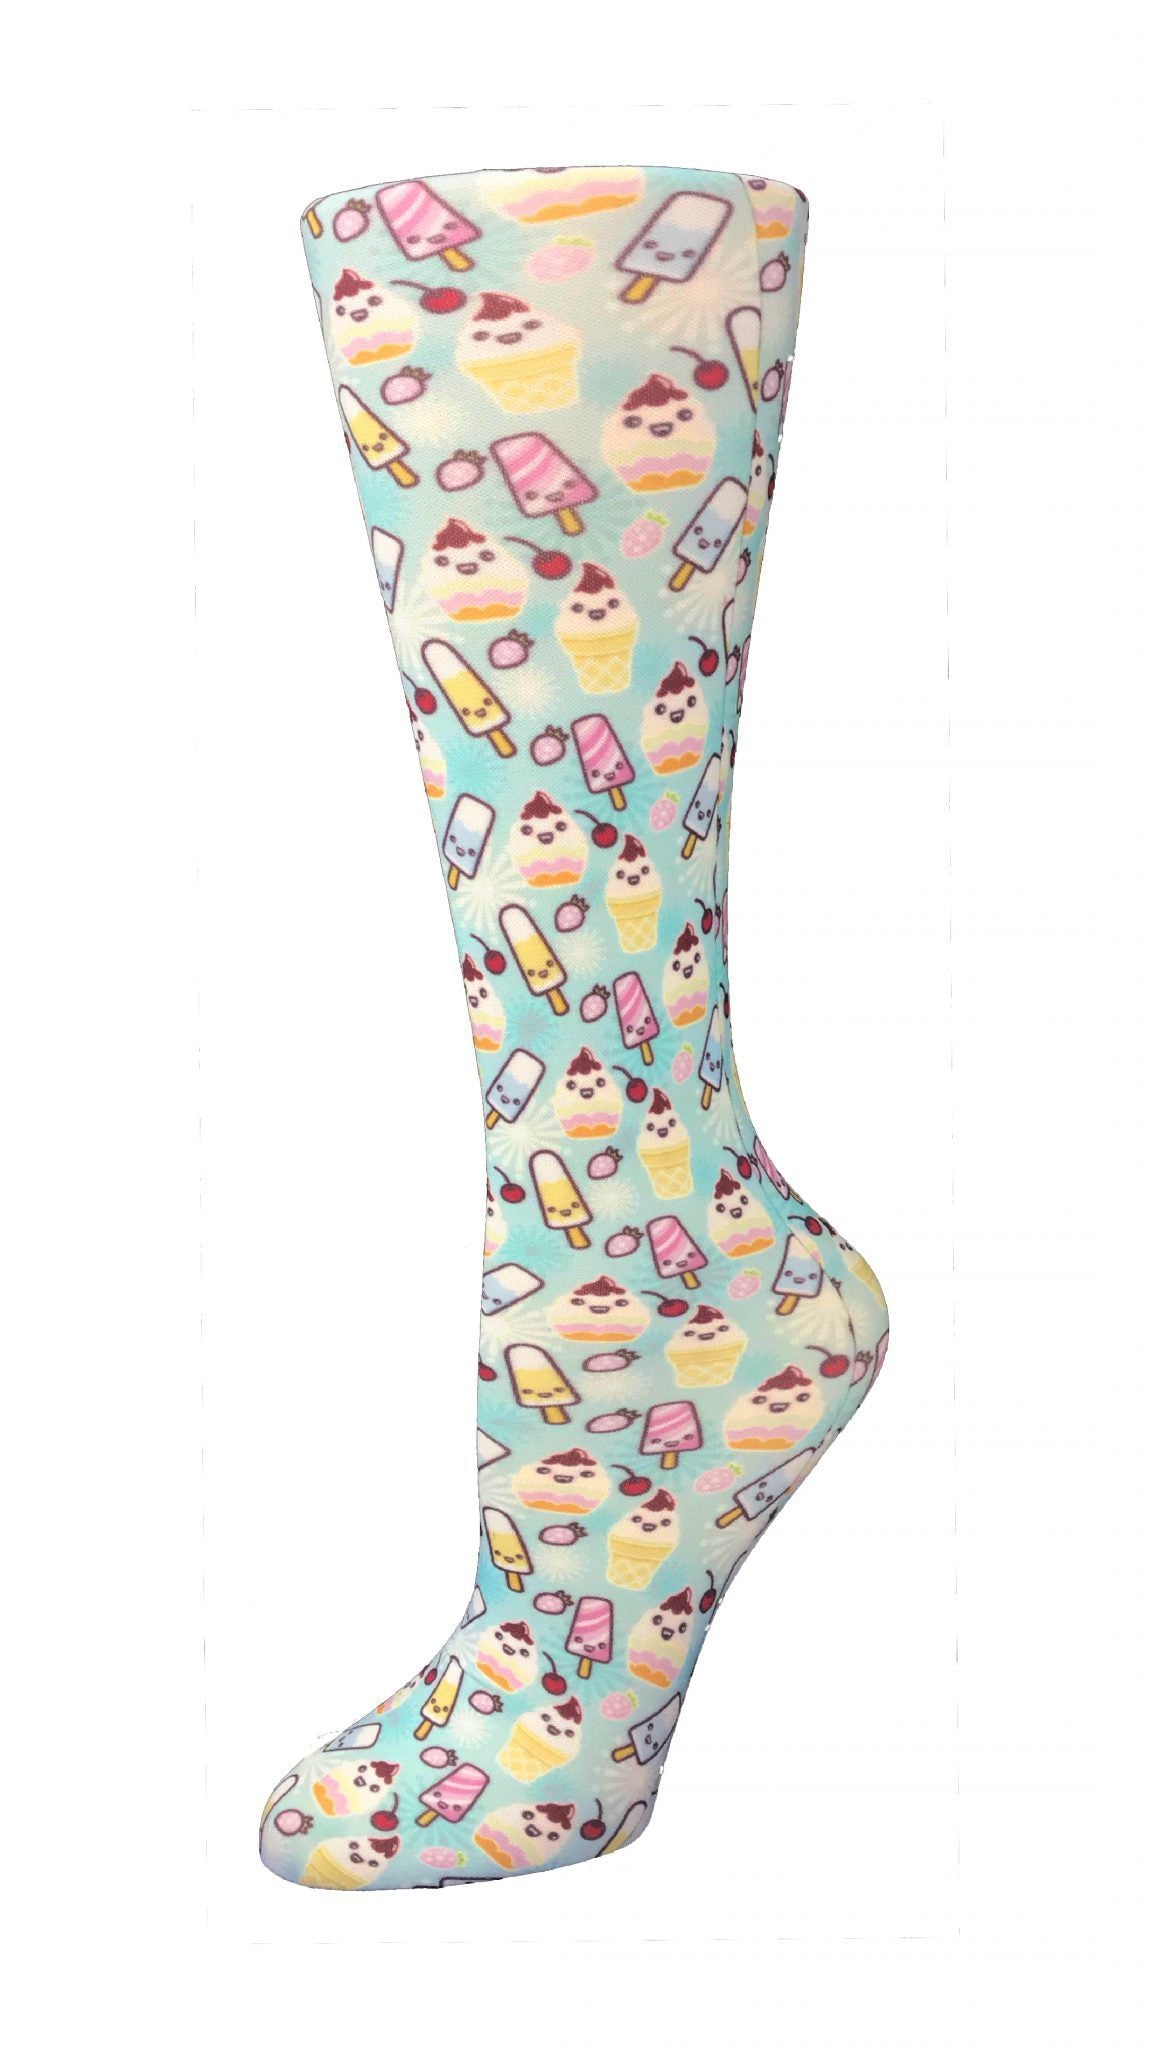 Cutieful Moderate Compression Socks 10-18 mmHg Knit in Print Patterns Ice Cream Social at Parker's Clothing and Shoes.